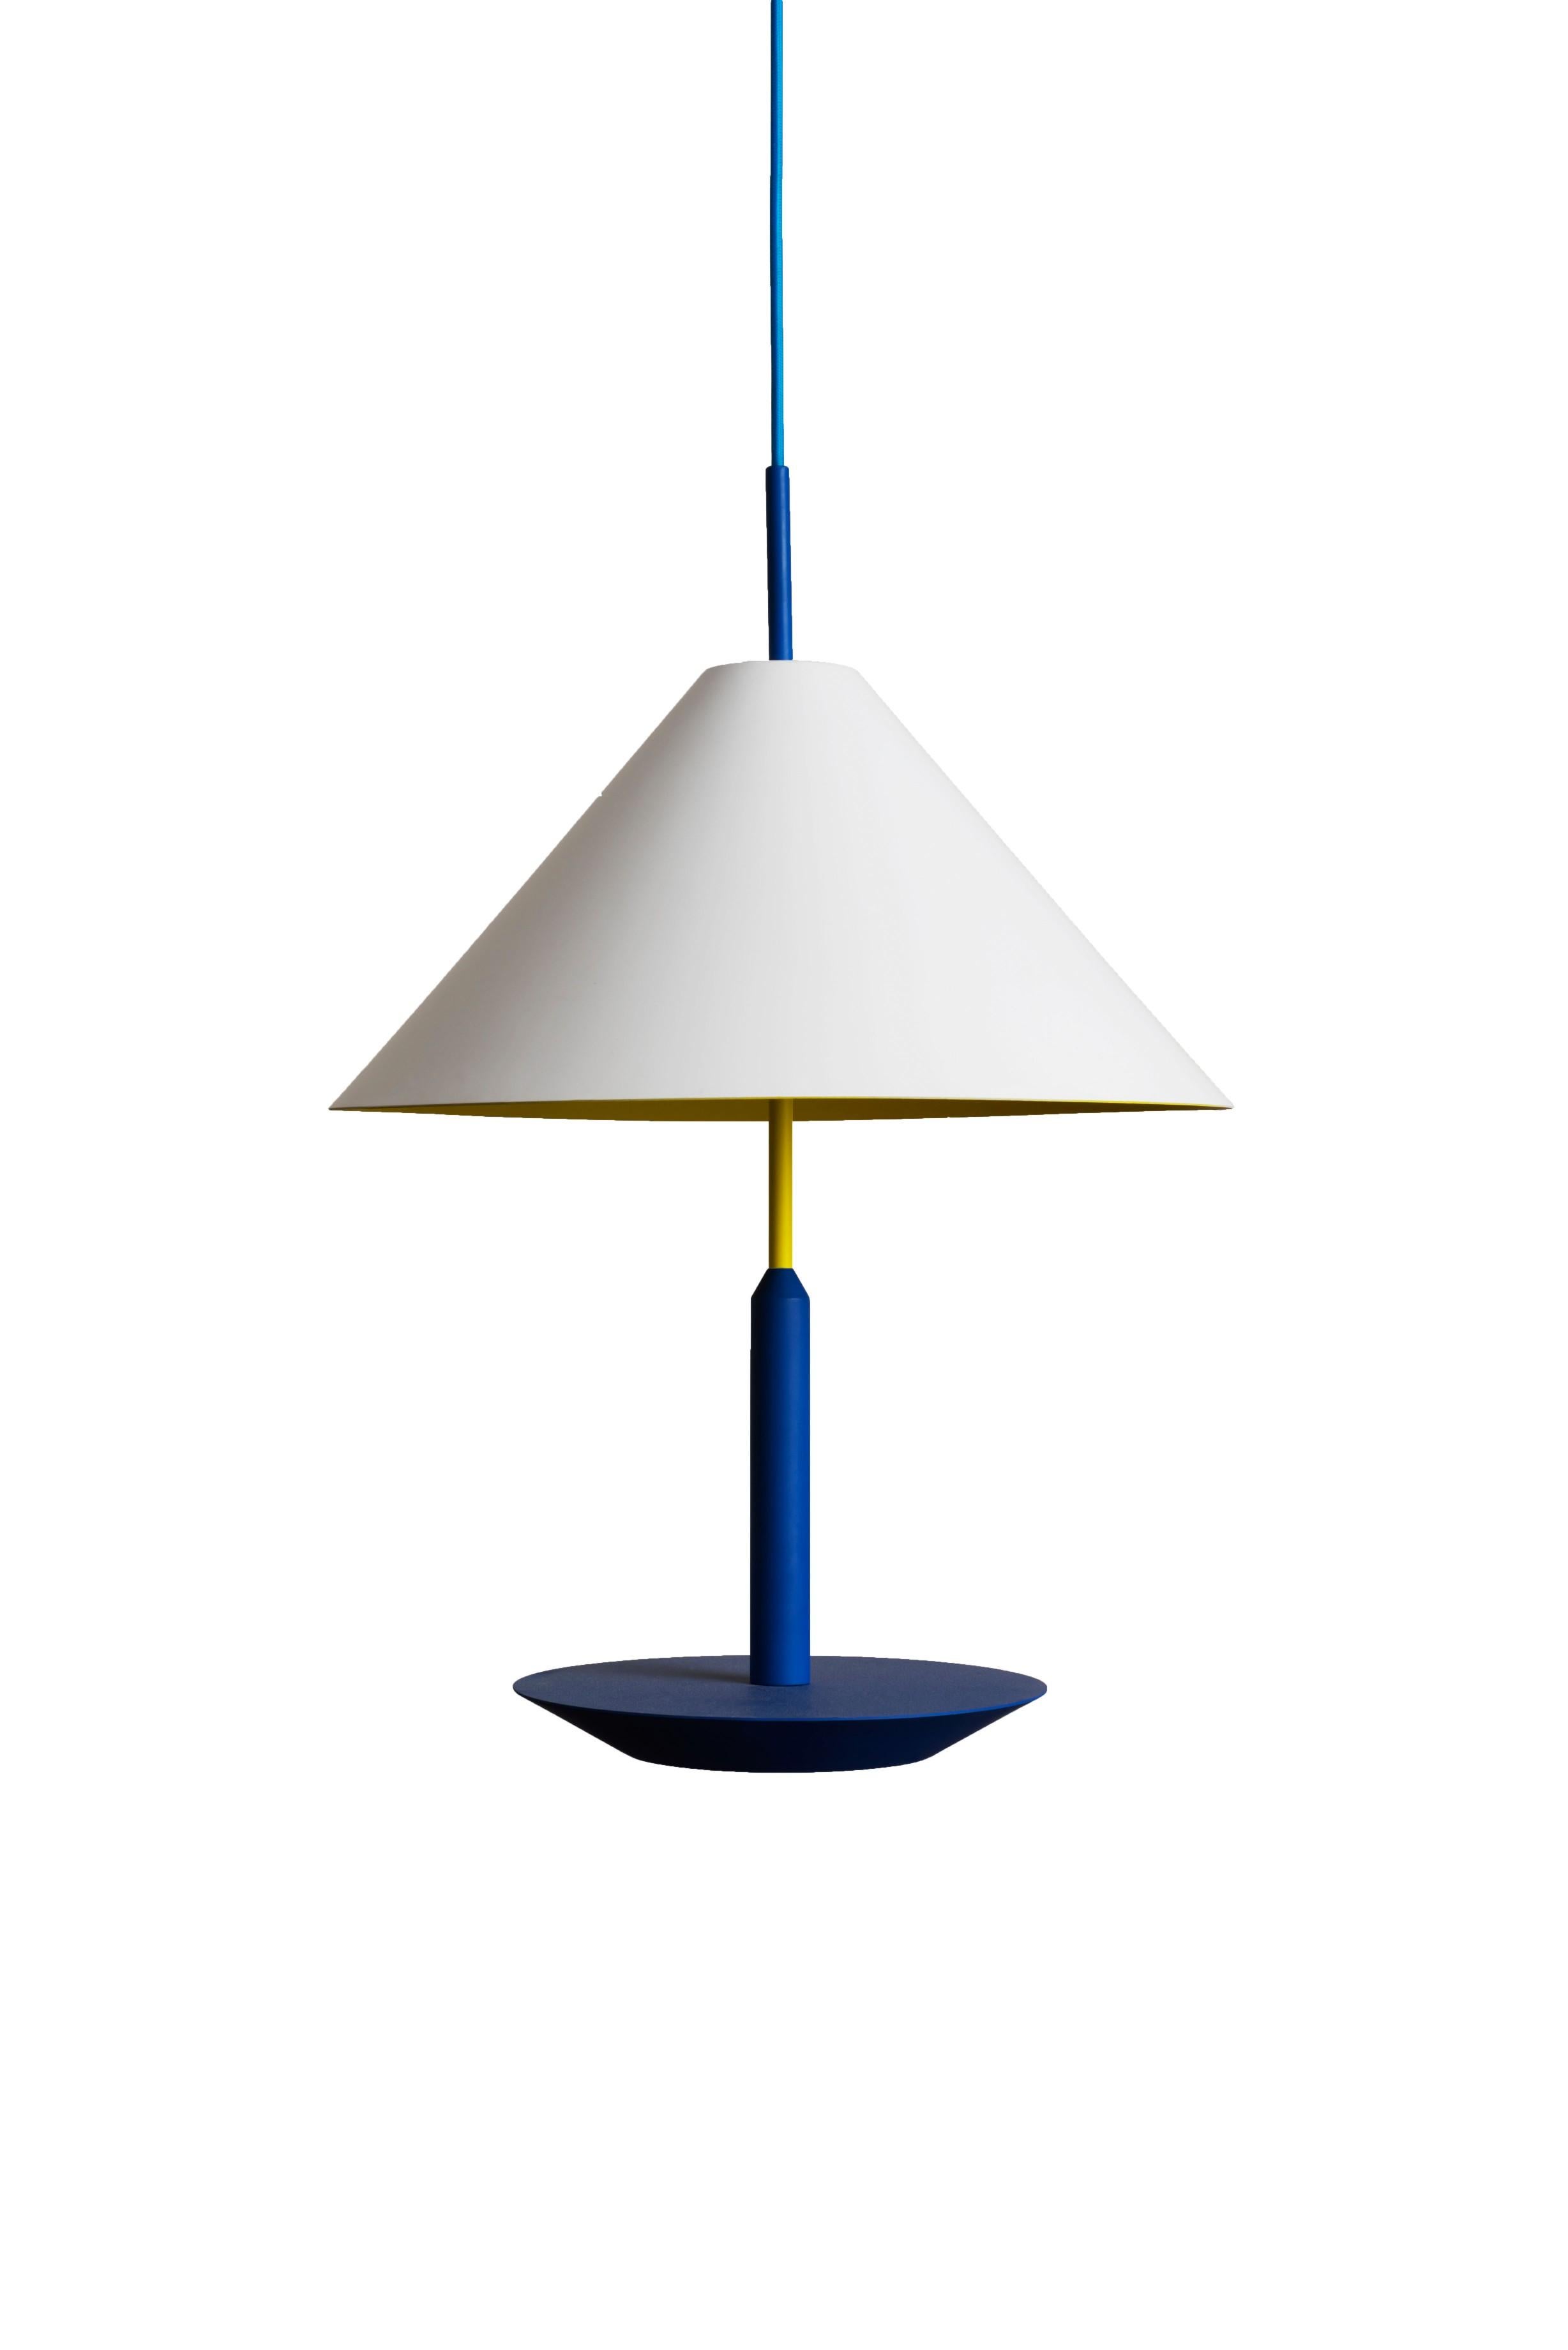 Colorful pendant lamp by Thomas Dariel, Maison Dada
Measures: Diameter 45 x Height 65 cm
Tricolored
Powder coated metal shade in matte white
Vibrant complementary tones on lampshade’s interior and base
Color cable, adjustable cable height (max